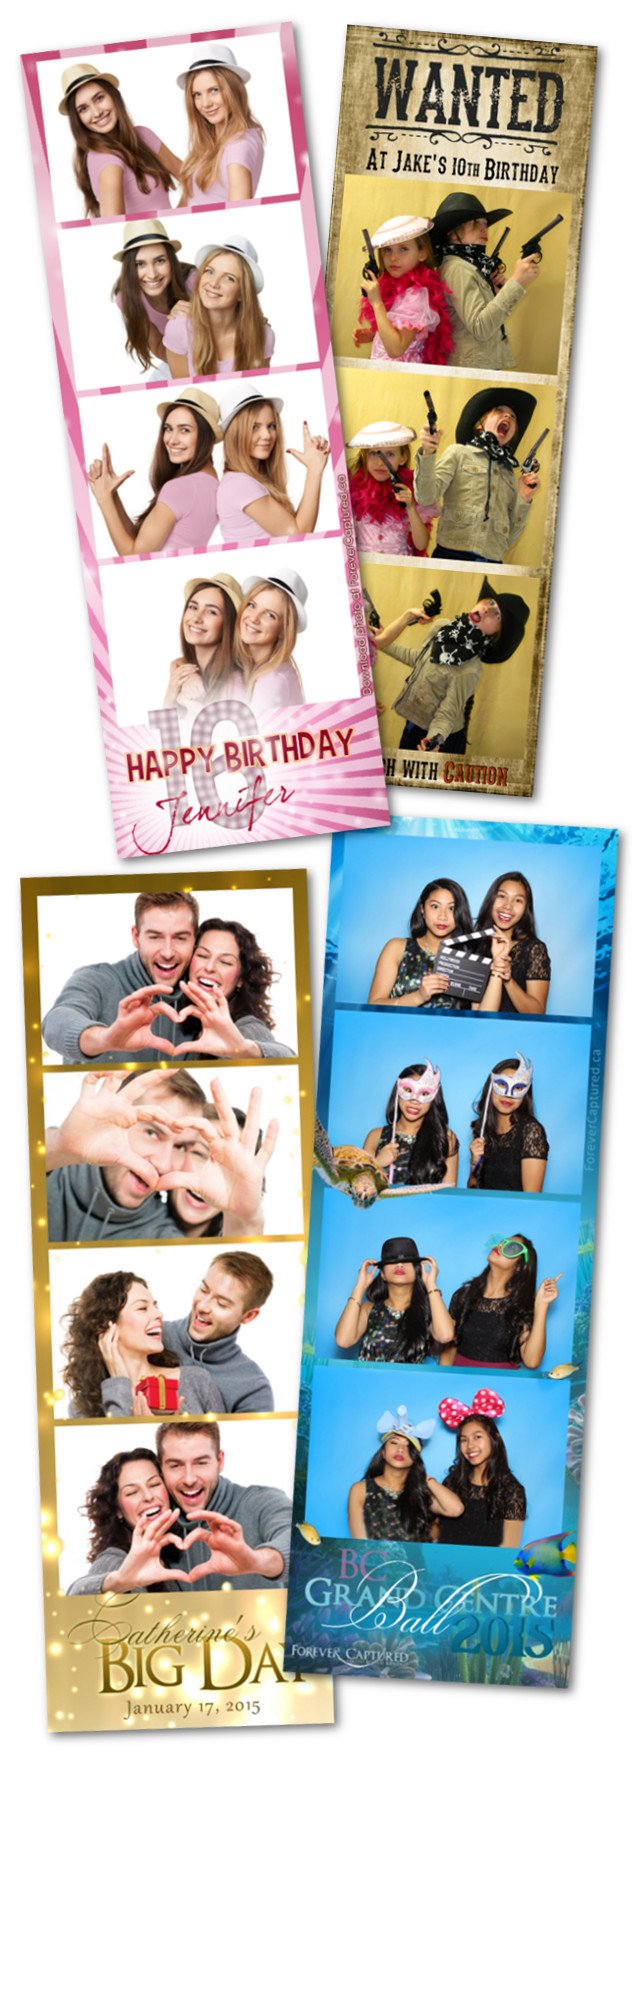 Photobooth rentals in Coquitlam, BC for weddings, events, and parties.